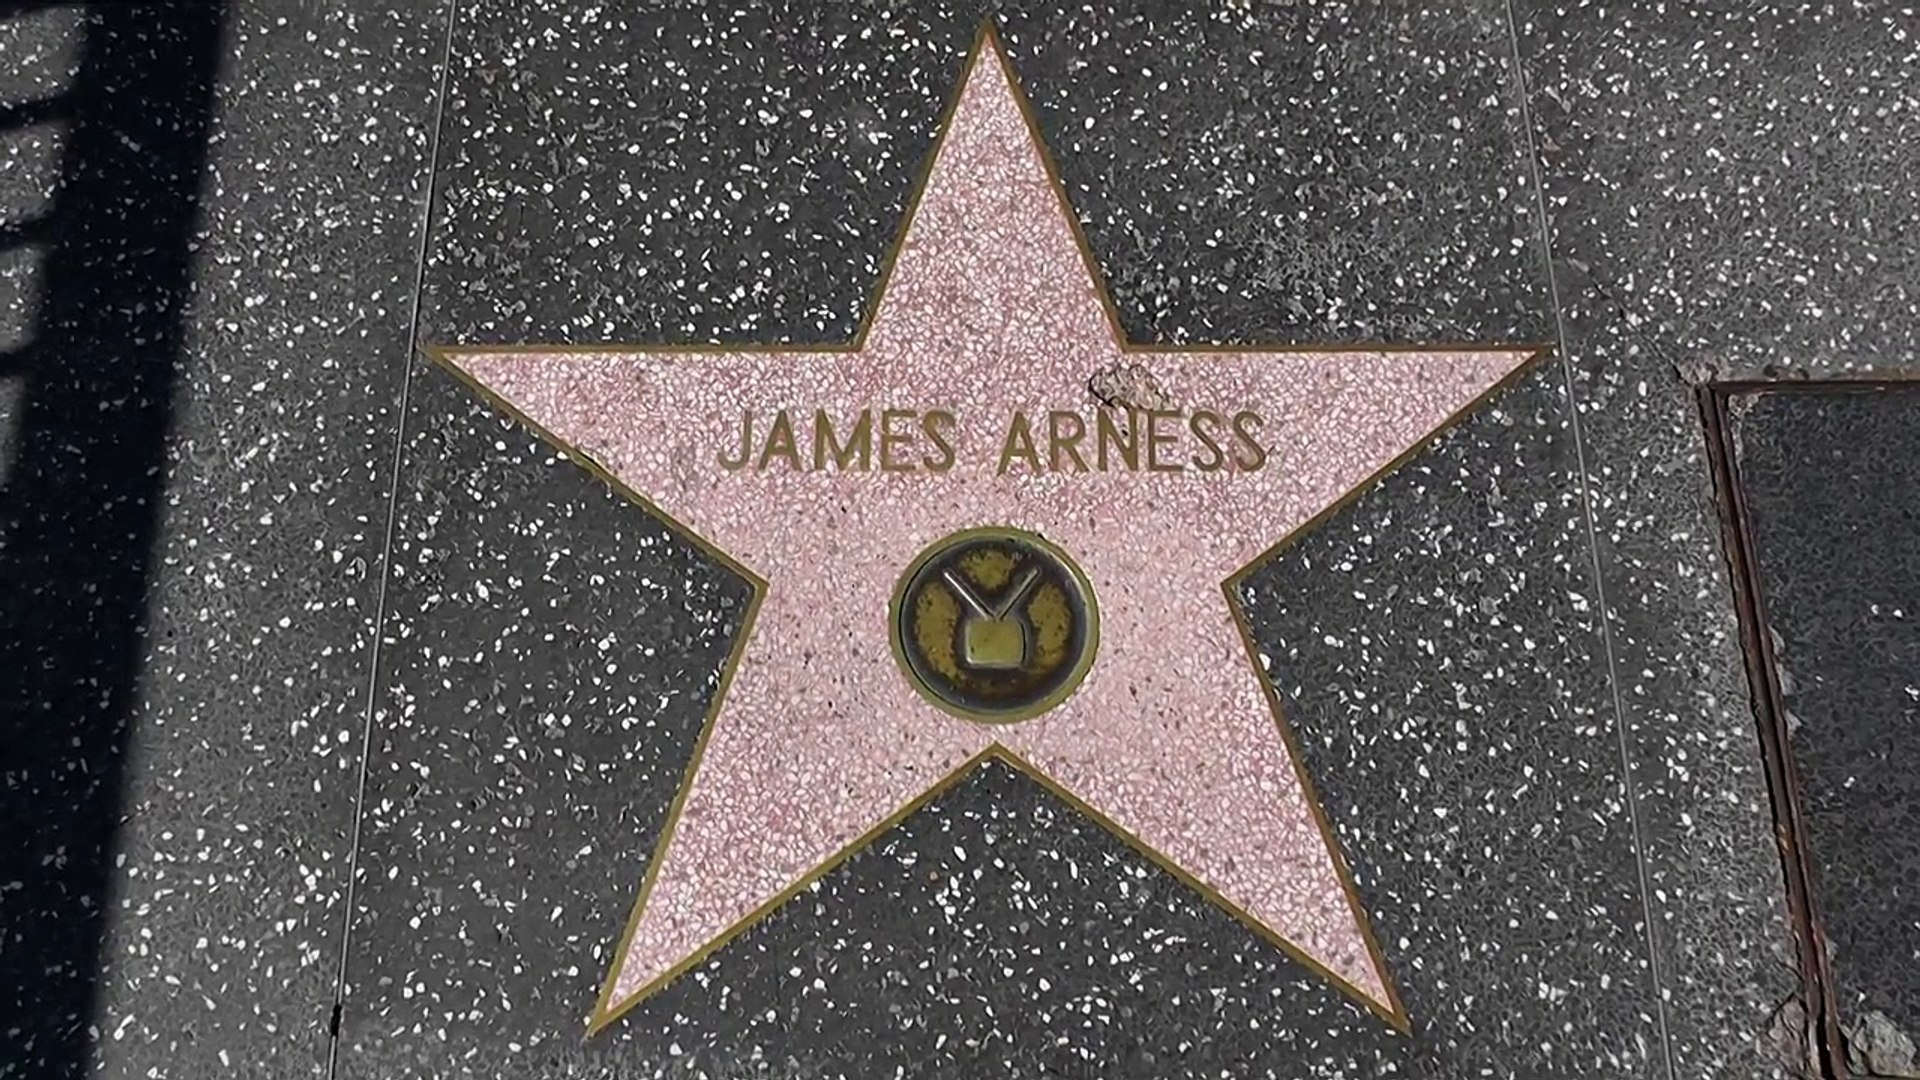 James Arness Star on the Hollywood Walk of Fame